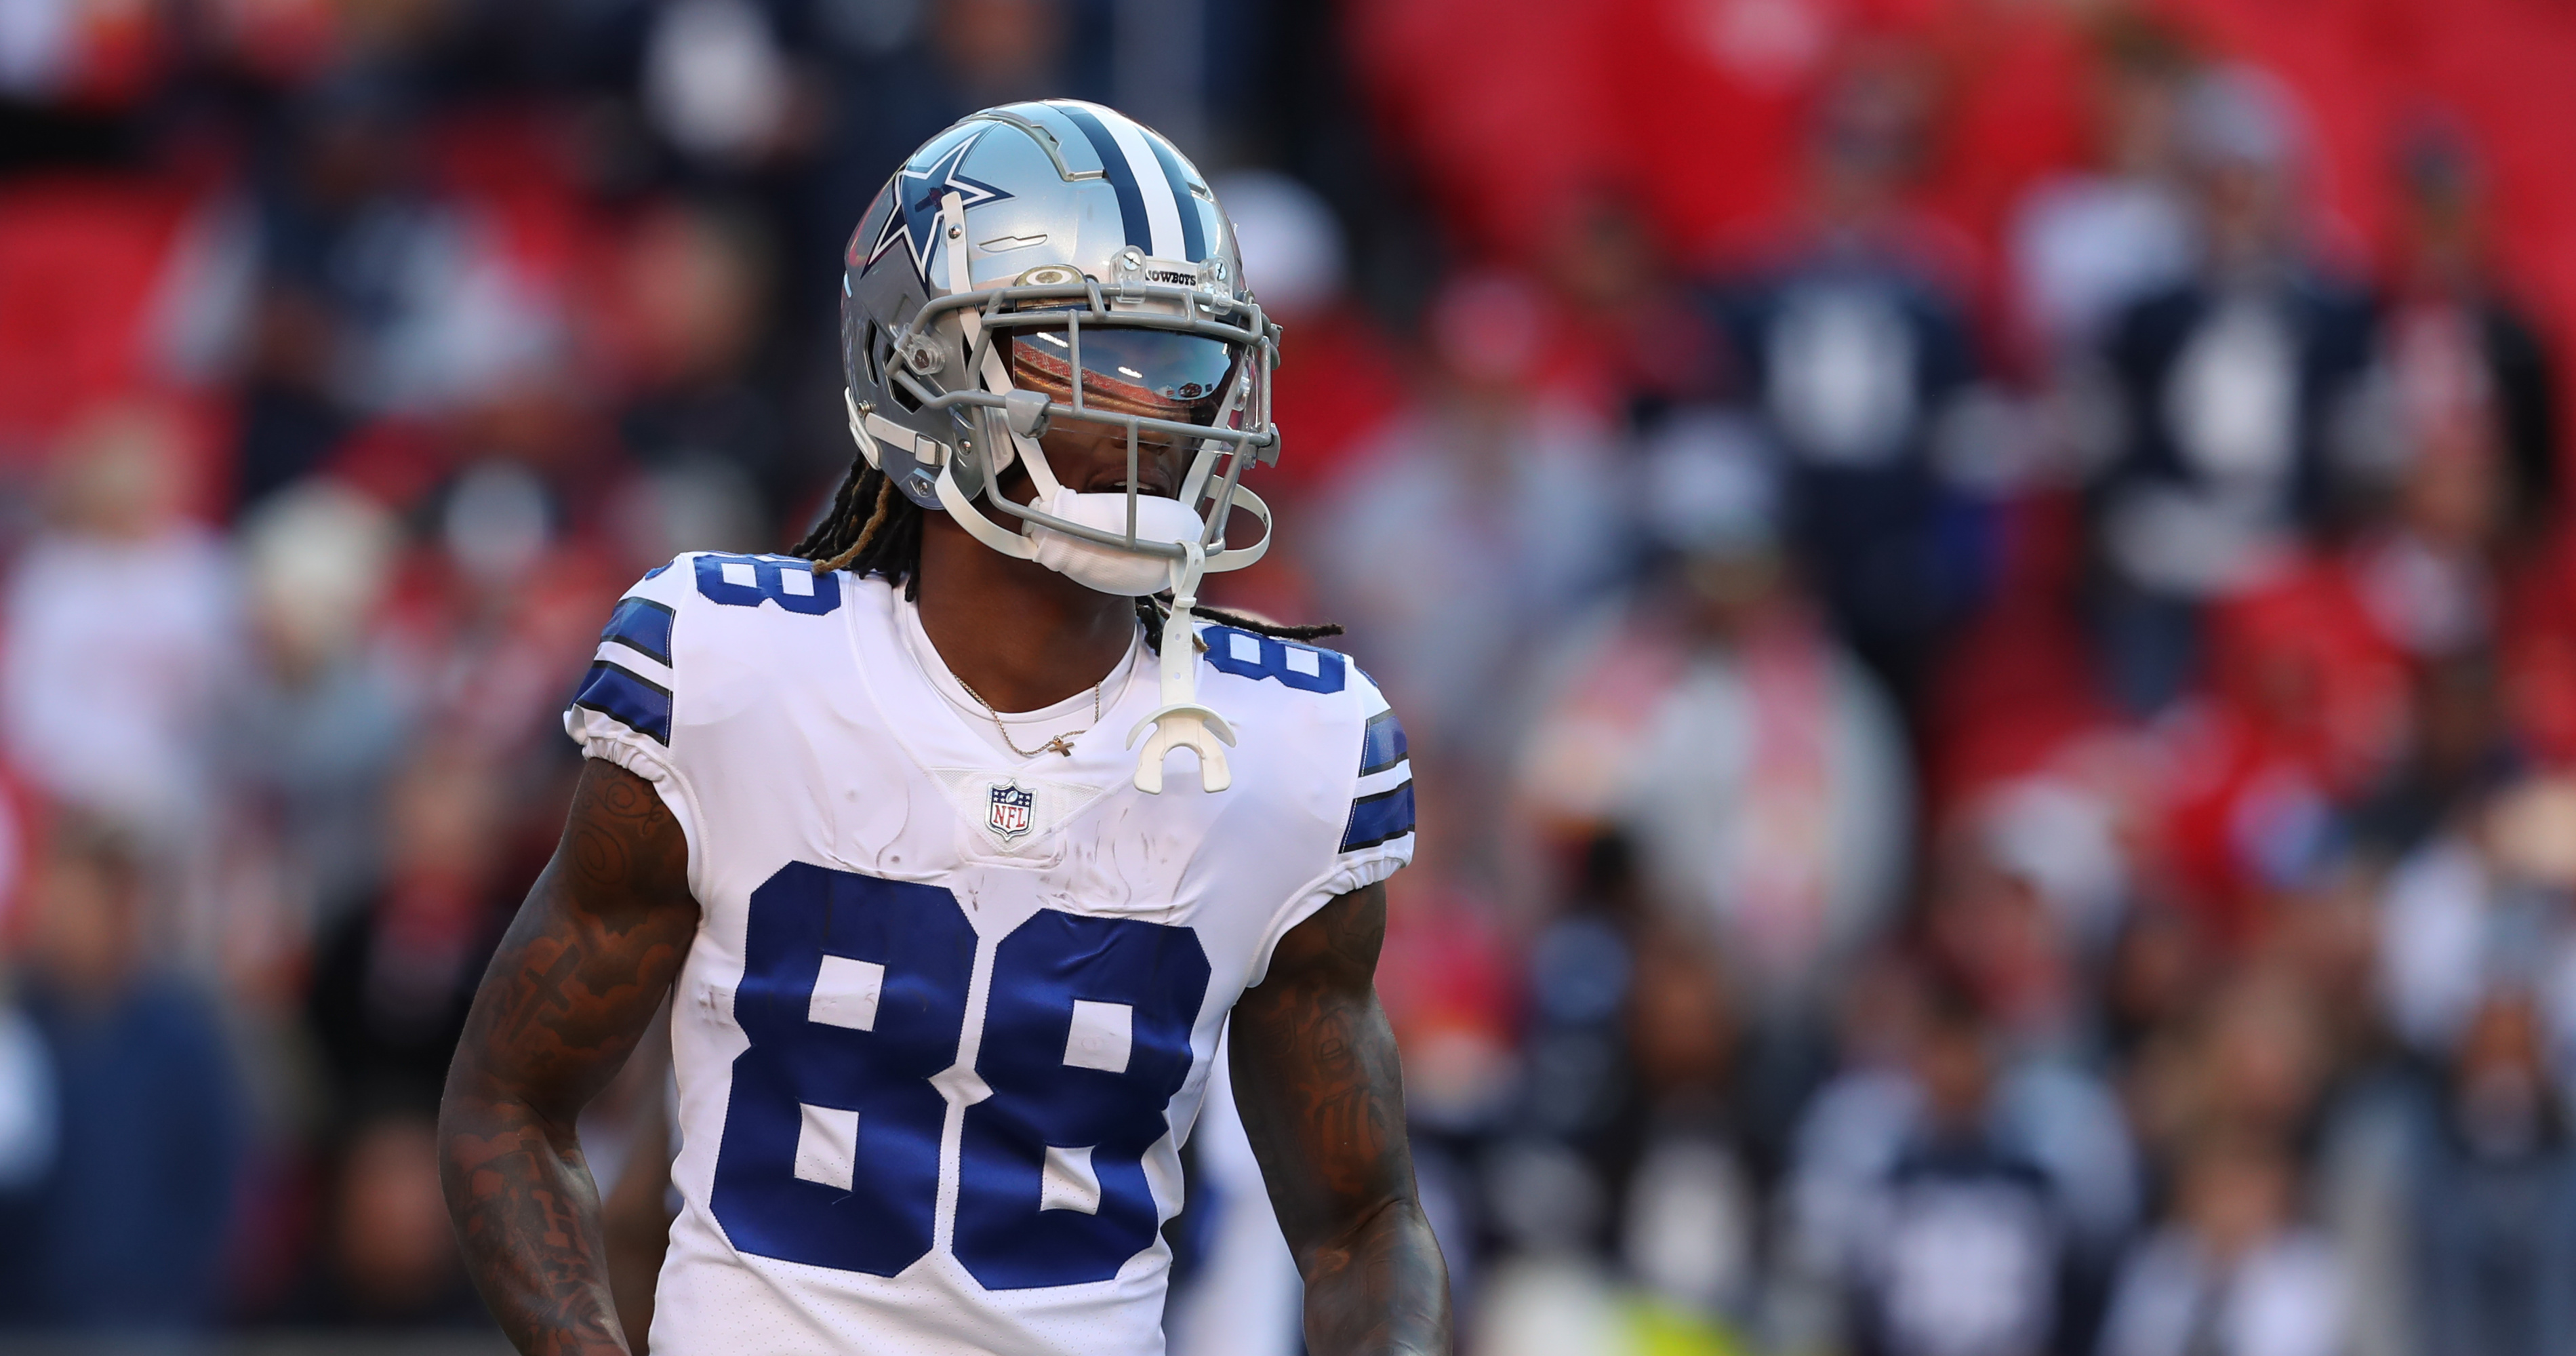 What impact will receiver CeeDee Lamb have on the Cowboys